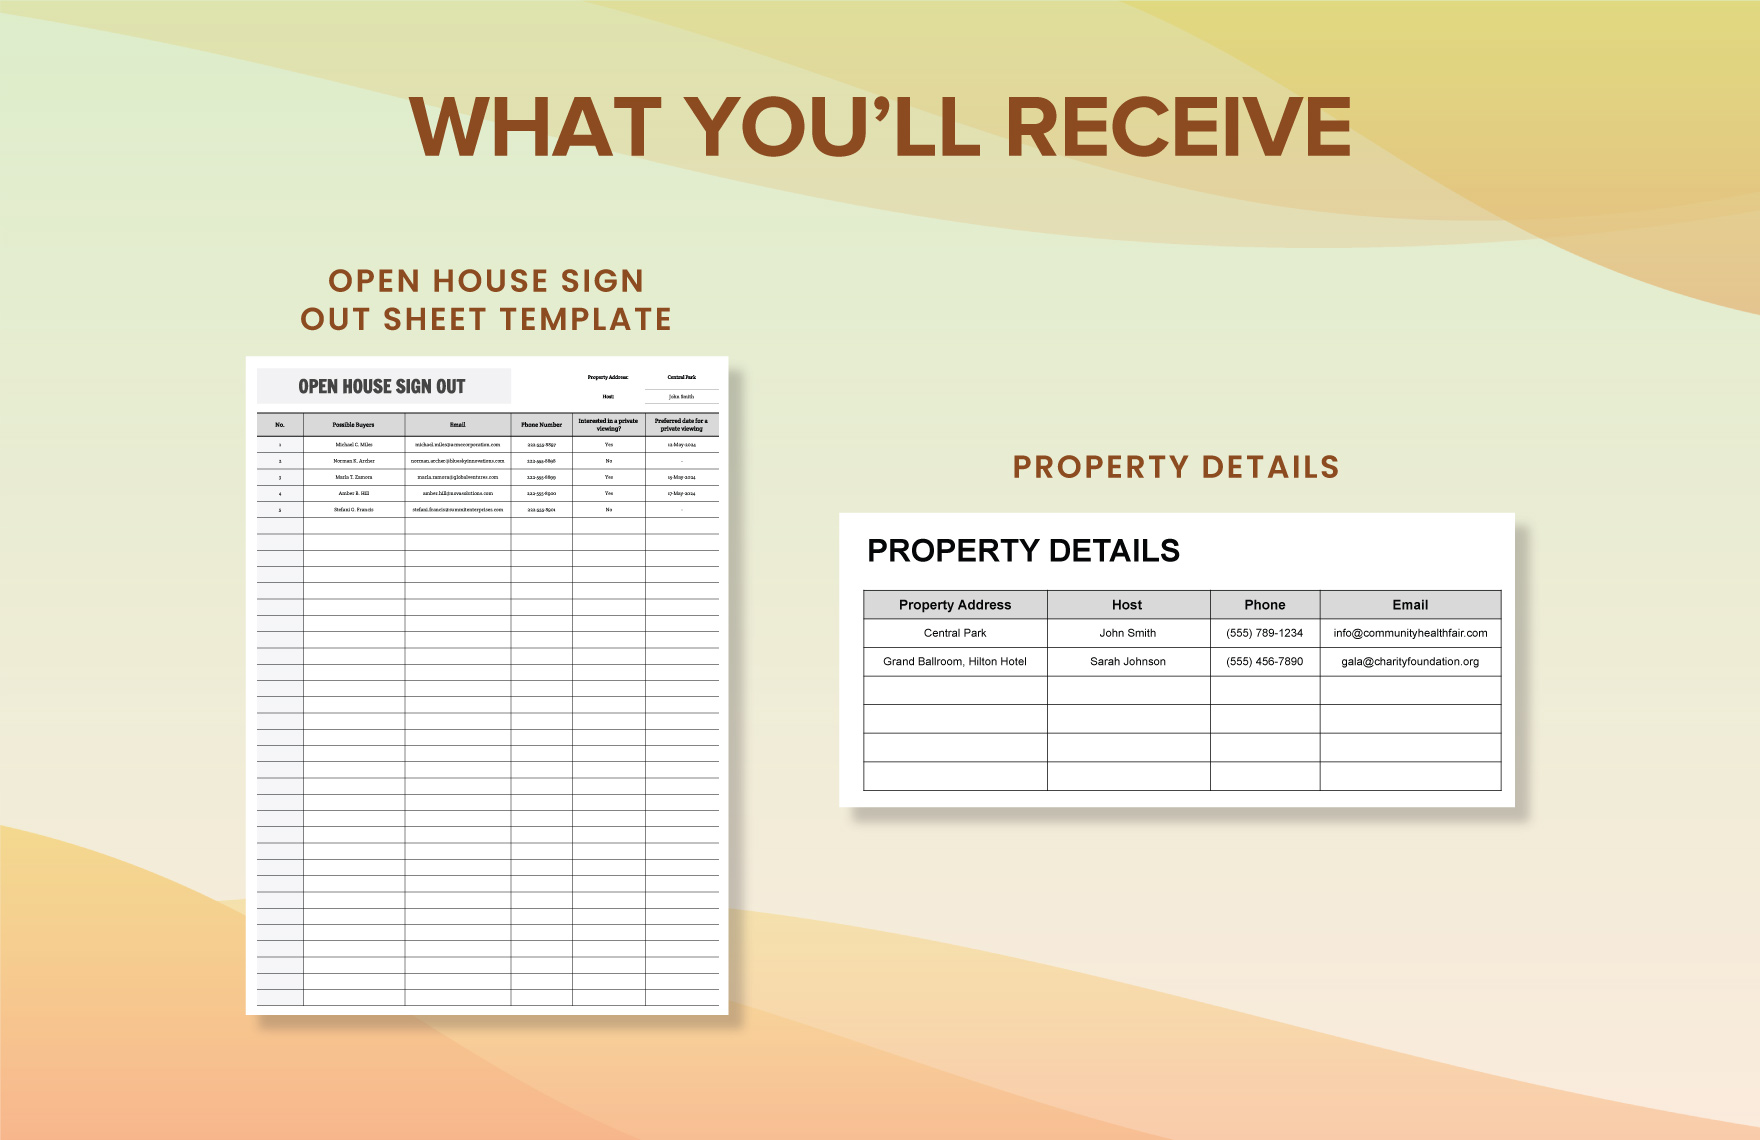 Open House Sign Out Sheet Template